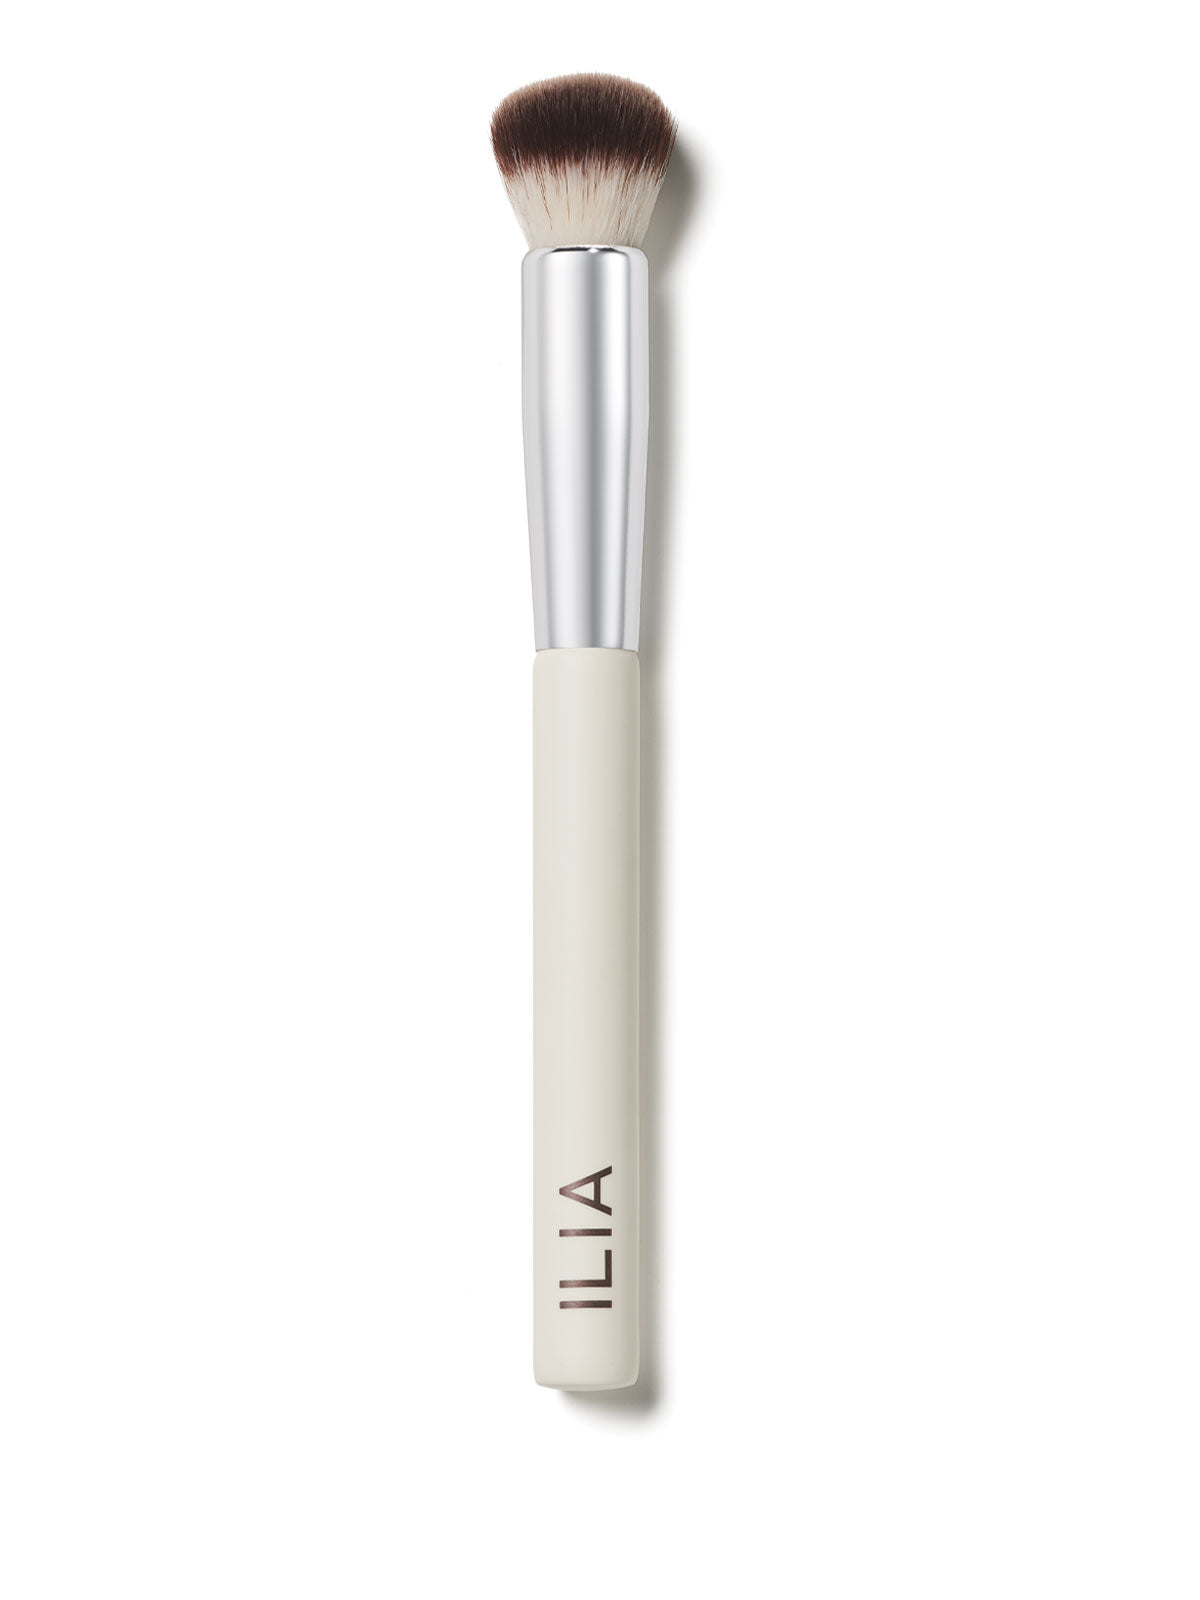 Brushes - Complexion Brush - Makeup | ILIA Beauty